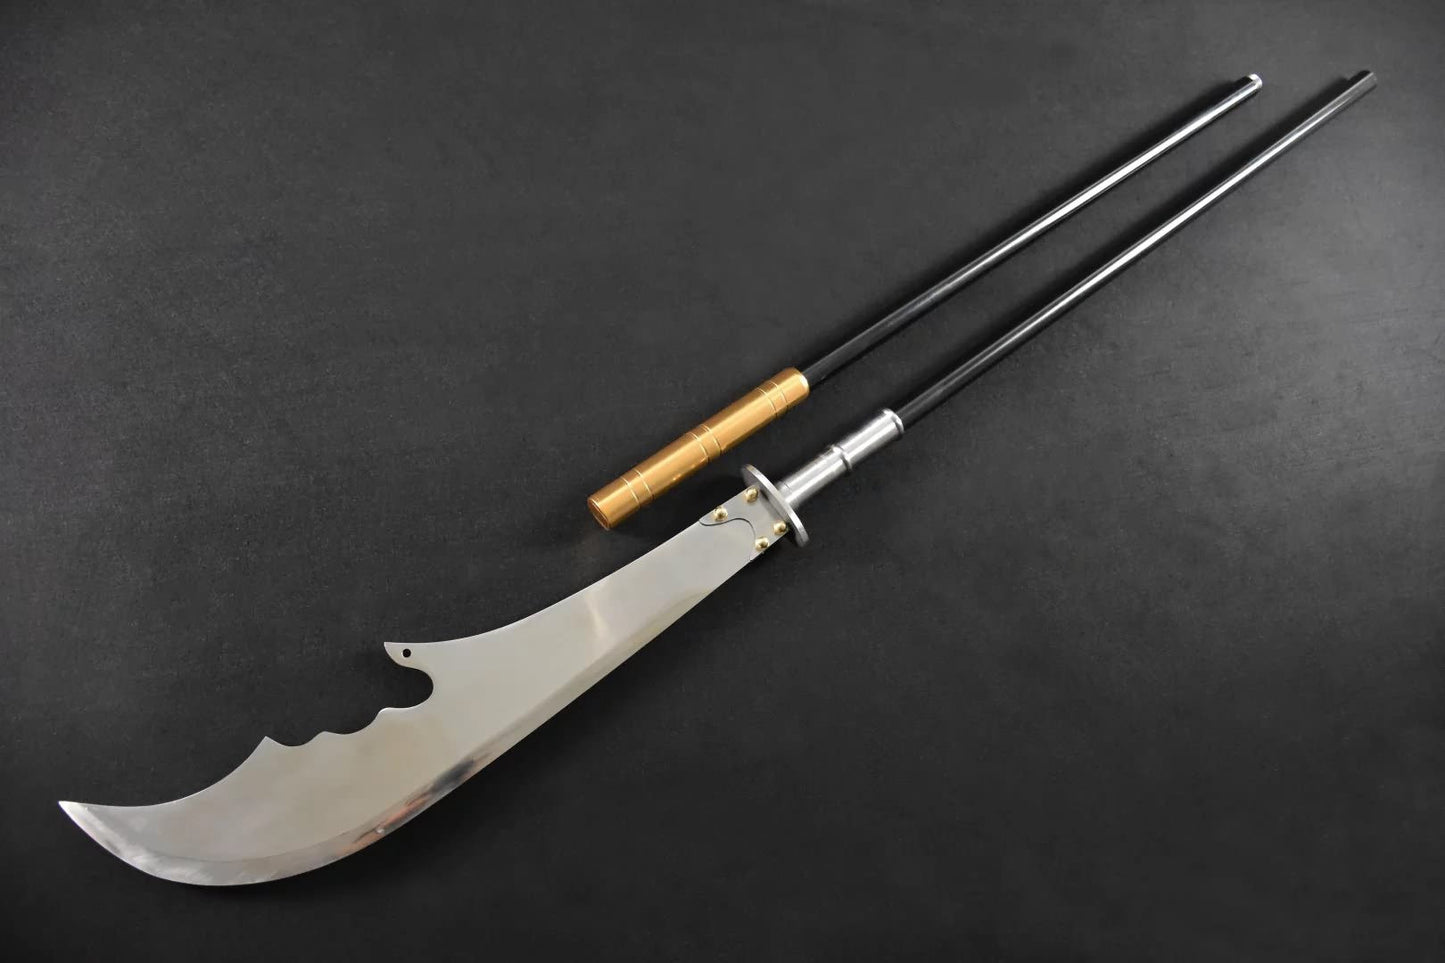 Guan Gong,Moon Broadsword/High carbon steel blade,Stainless steel rod - Chinese sword shop